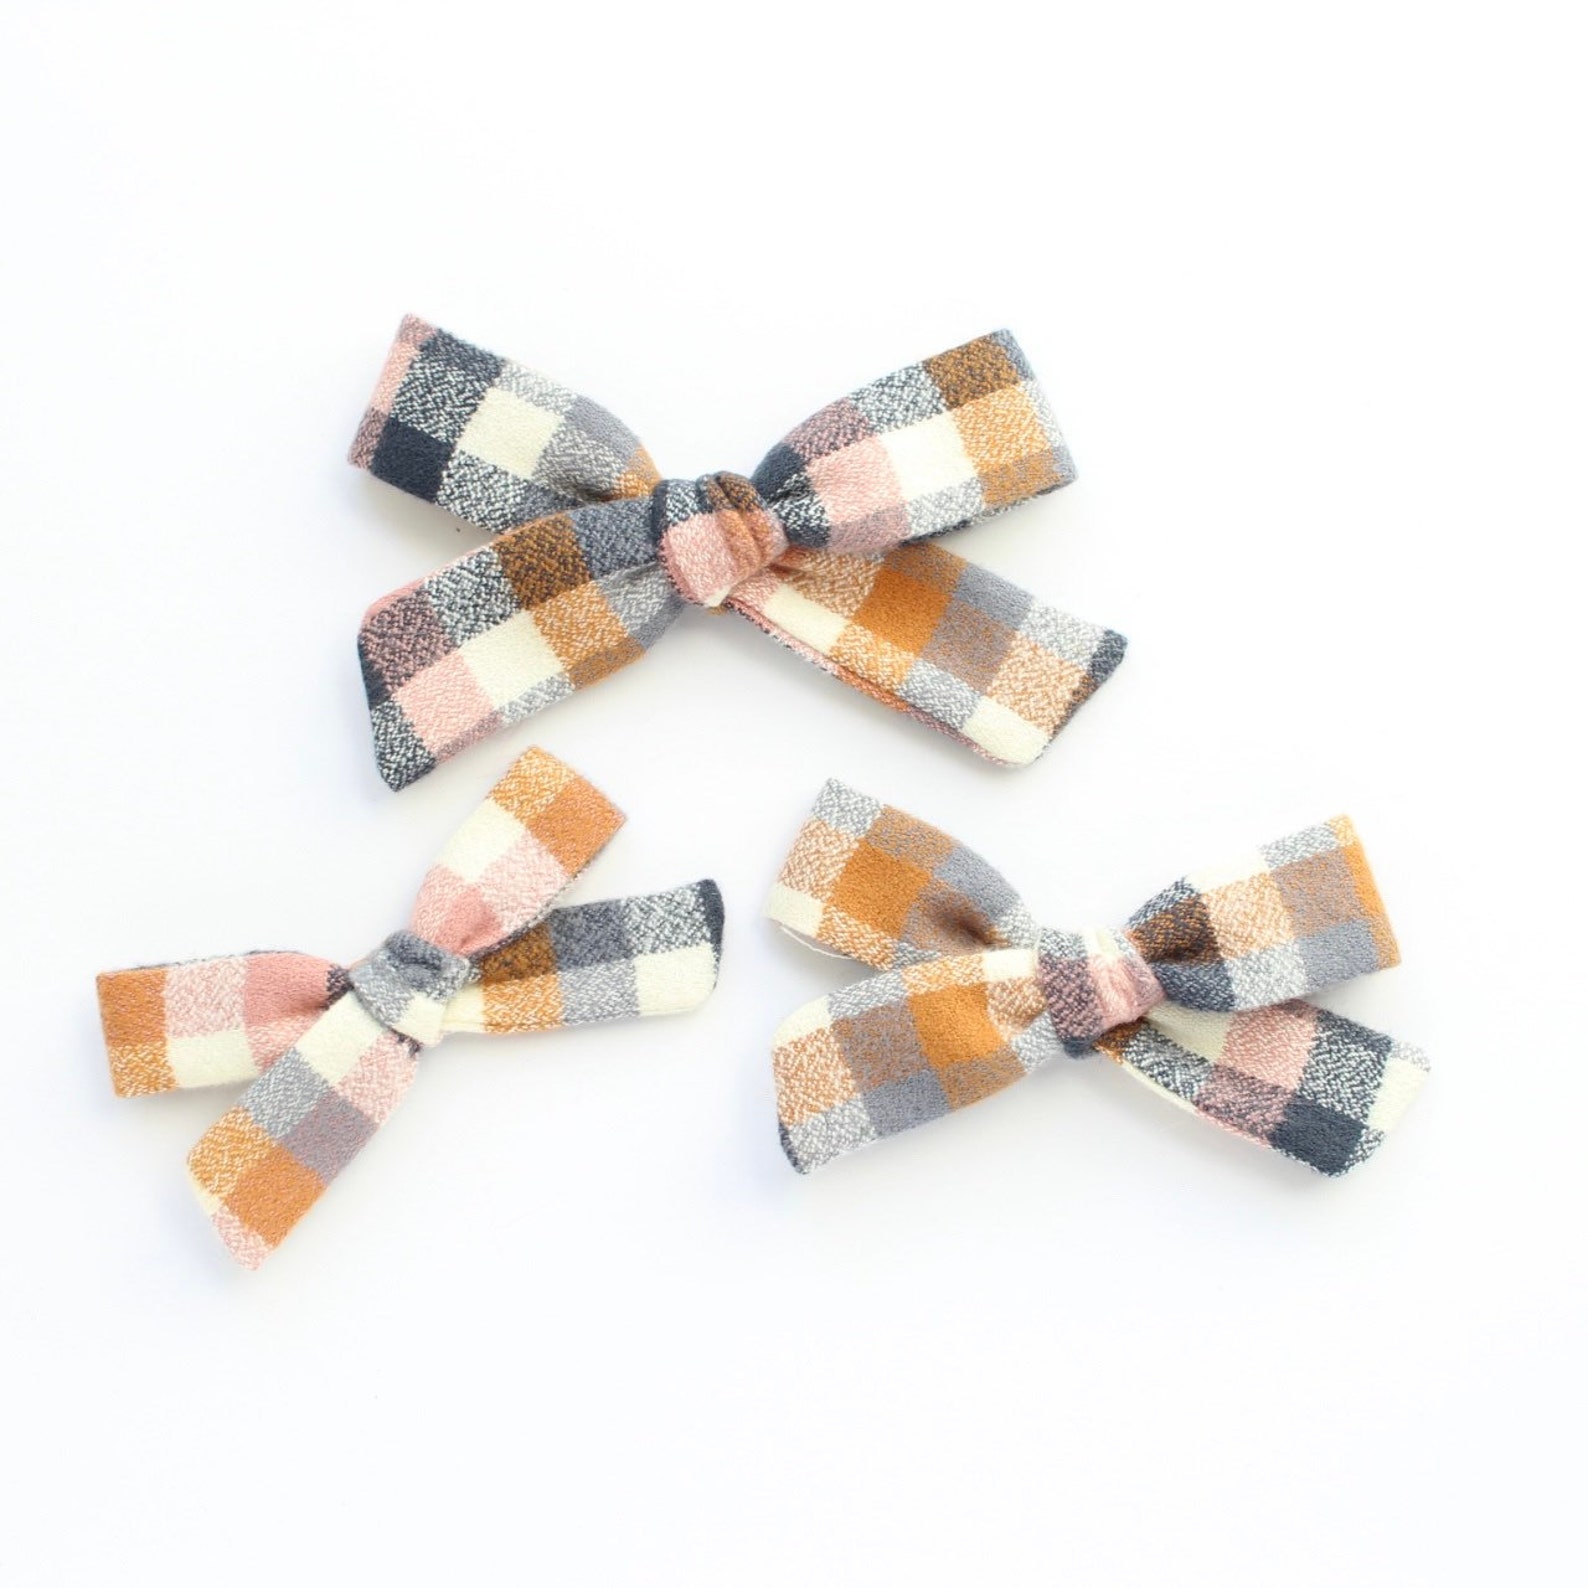 Flannel Hair Bows. Flannel Tie Baby Bows. Toddler Hair Bows. - Etsy